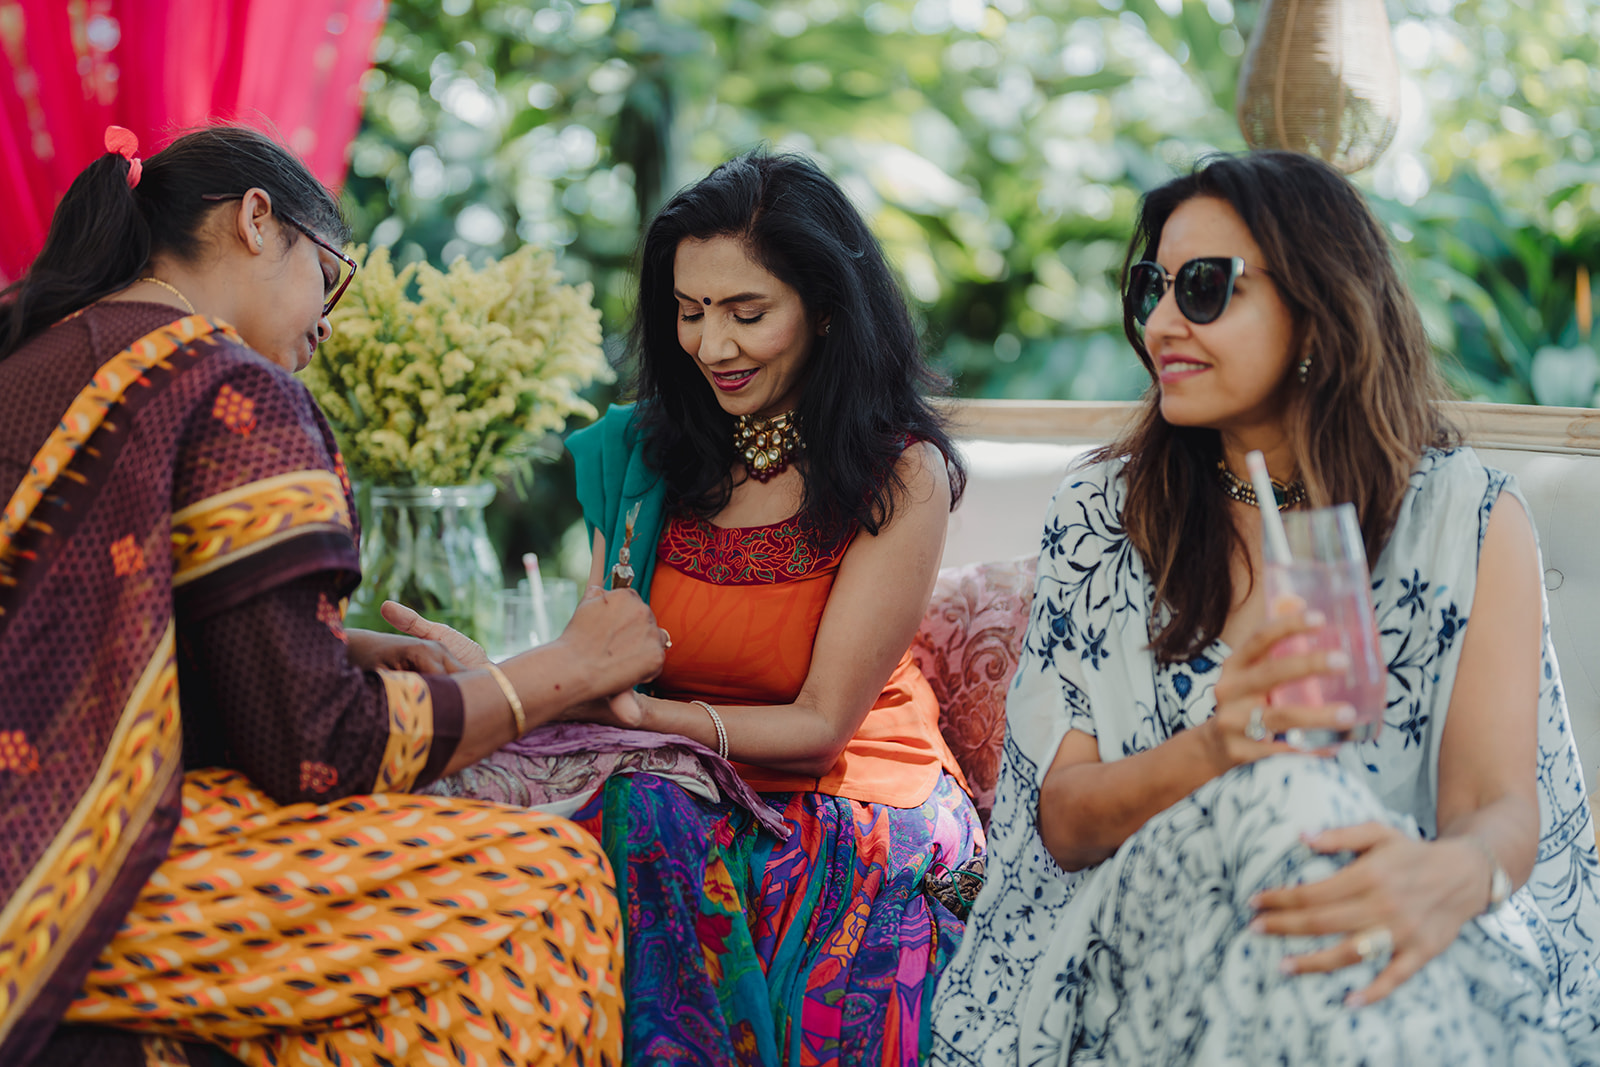 Smiles and henna: Guest relishing the festive spirit of the mehendi ceremony